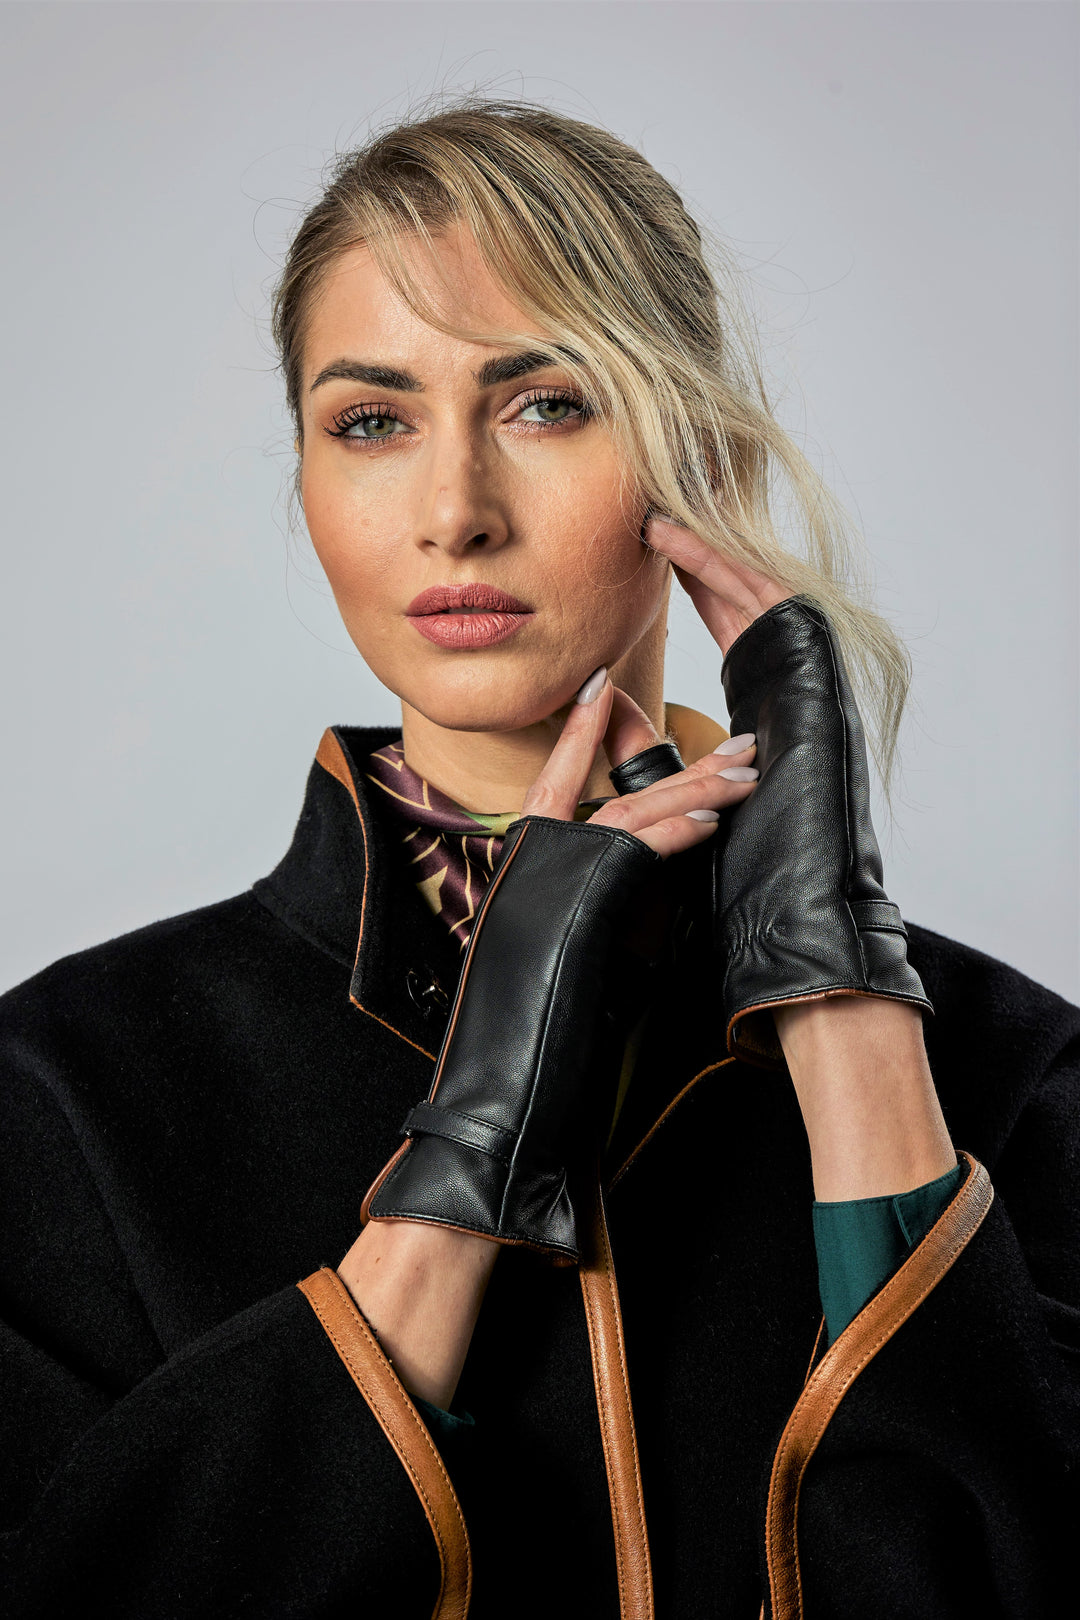 Womens Signature ICONIC Fingerless Black Leather Cashemere Blend Lined Gloves Alesia Chaika